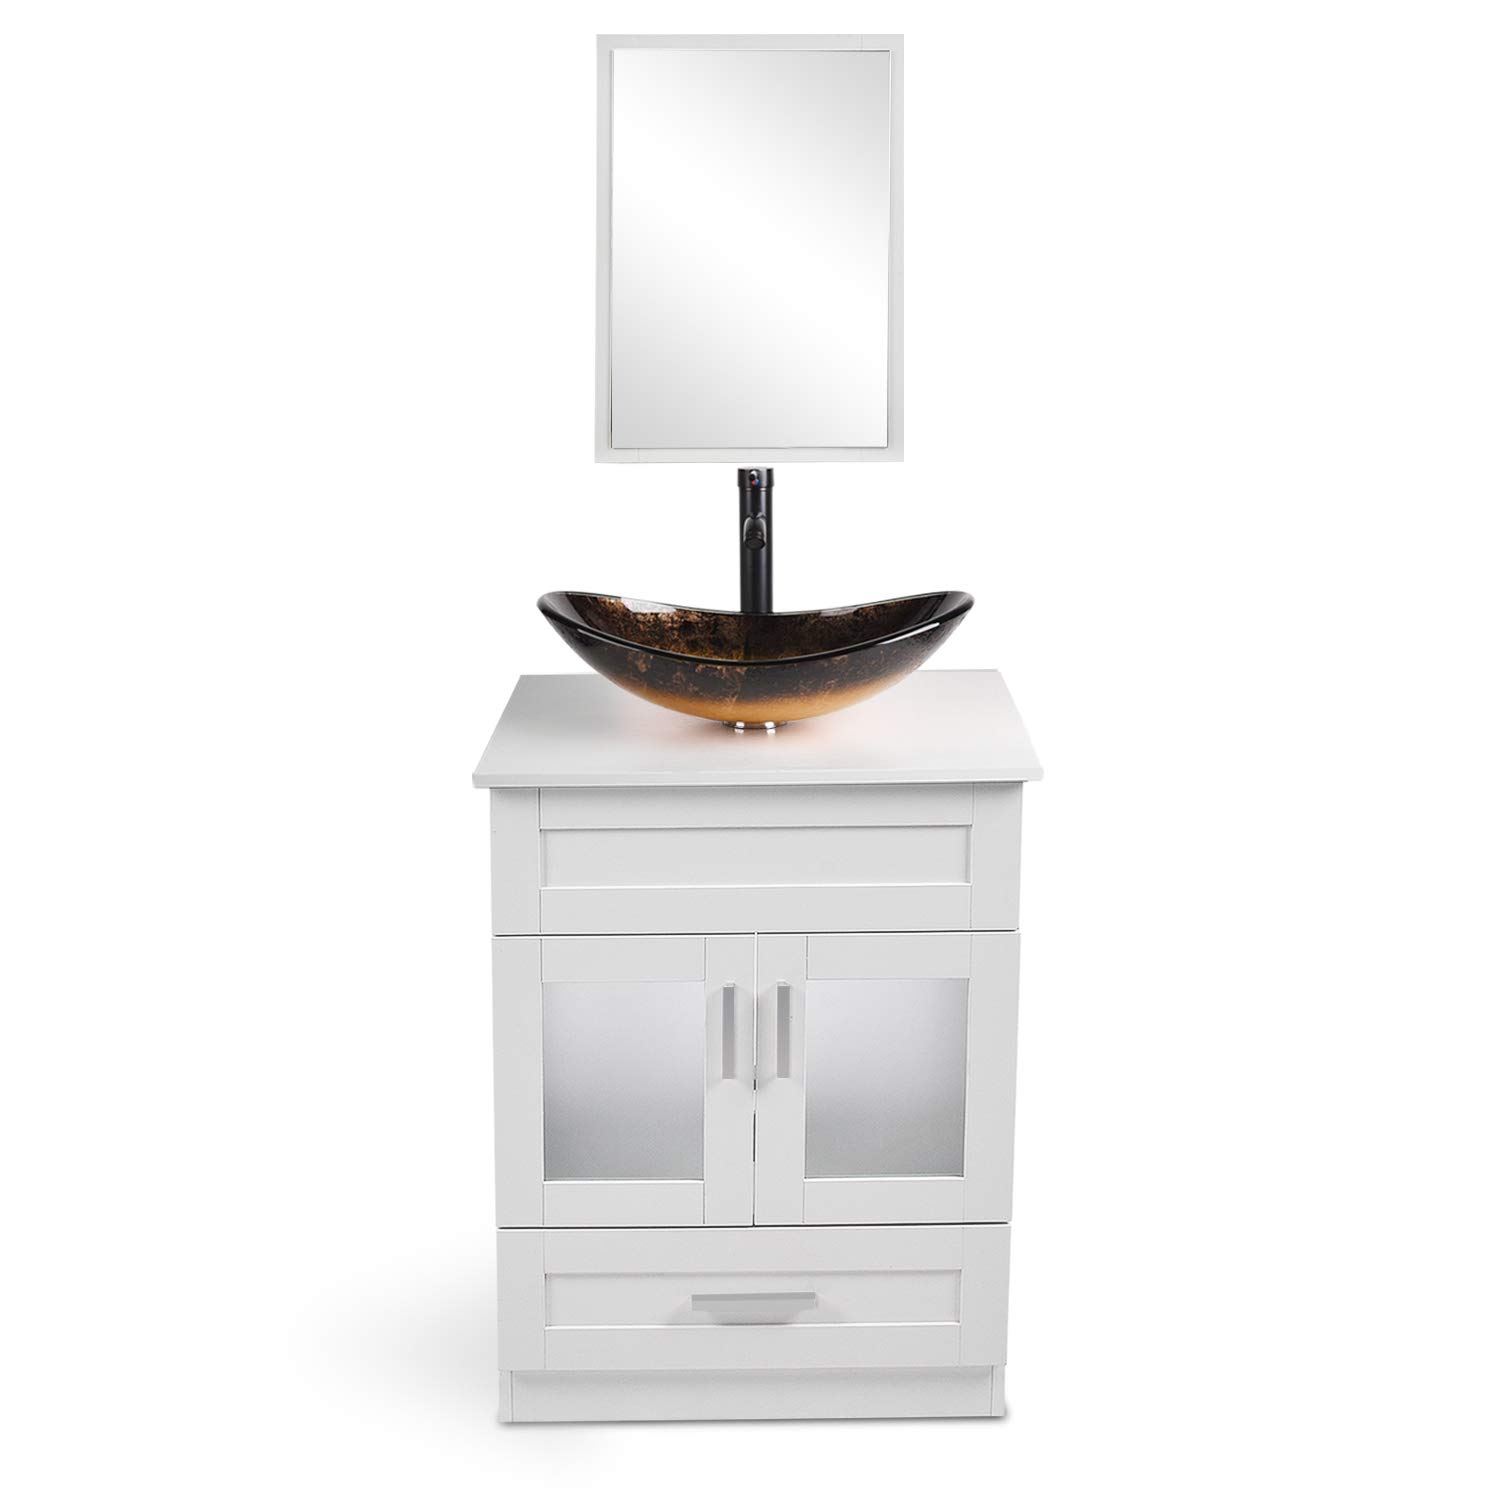 Buy 24 Inch Bathroom Vanity Set With Sink Pvc Board Cabinet Vanity Combo With Counter Top Glass Vessel Sink Vanity Mirror And 15 Gpm Faucet Online In Indonesia 543447259